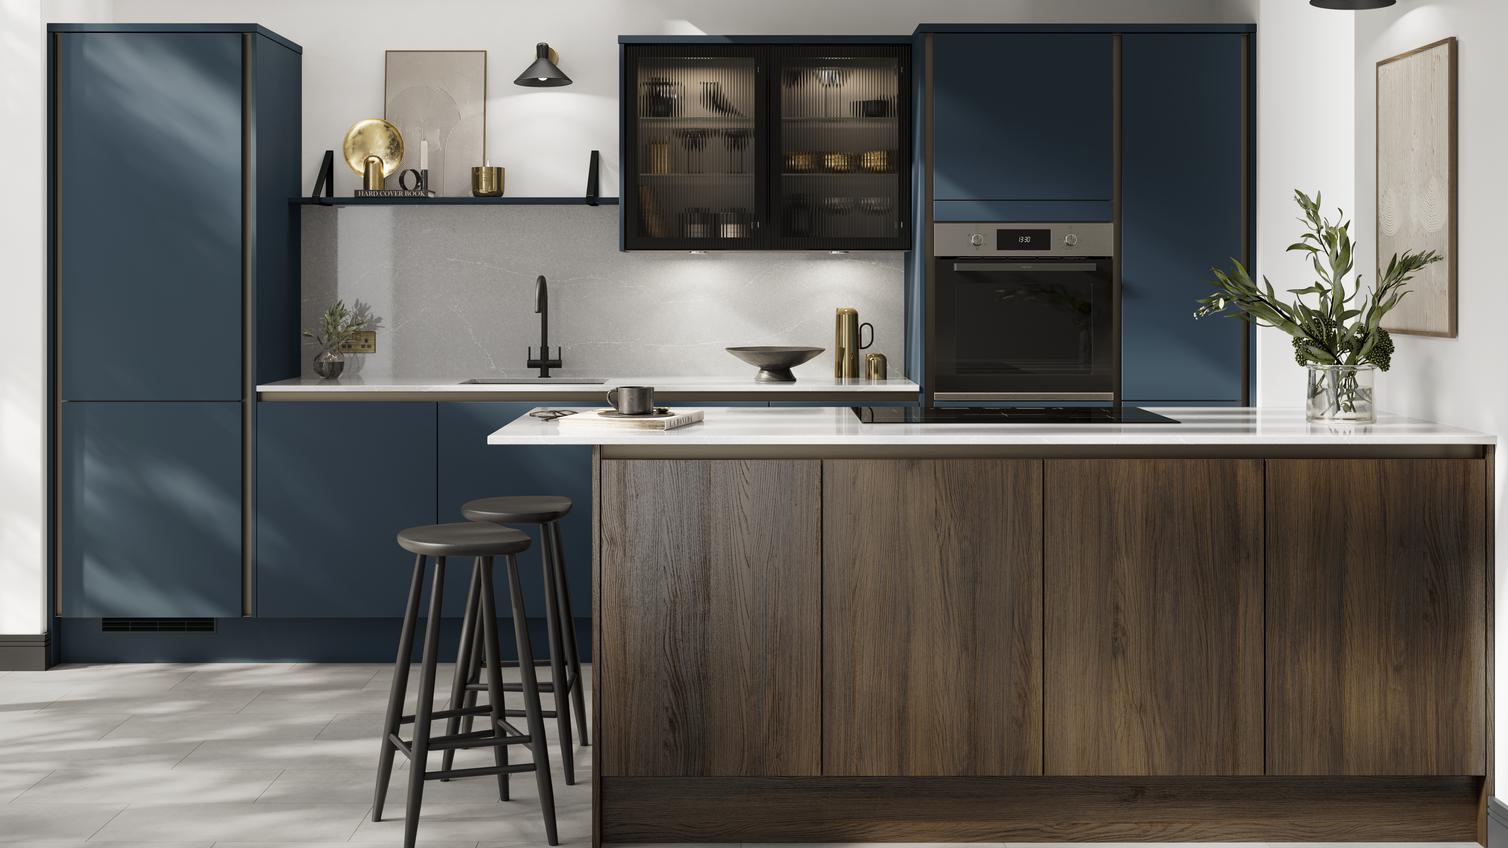 A two-tone kitchen idea with walnut and navy slab doors in a peninsula layout. Contains black trims and fluted wall cabinets.